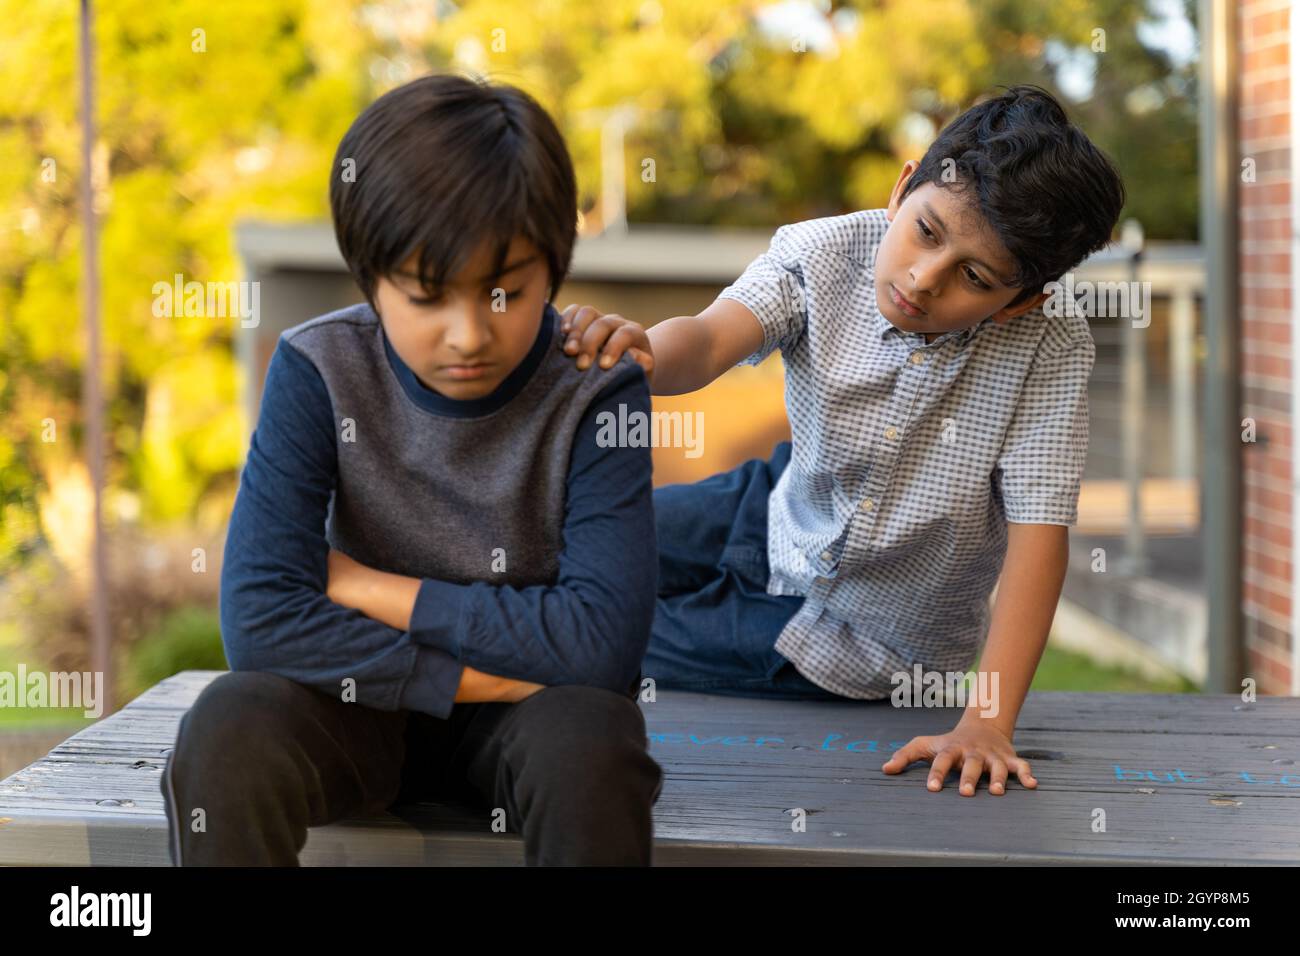 Angry child care. Caring Friendship concept. Giving help concept. Kid giving Support. Golden hour scene of upset child. Hand on shoulder. Stock Photo